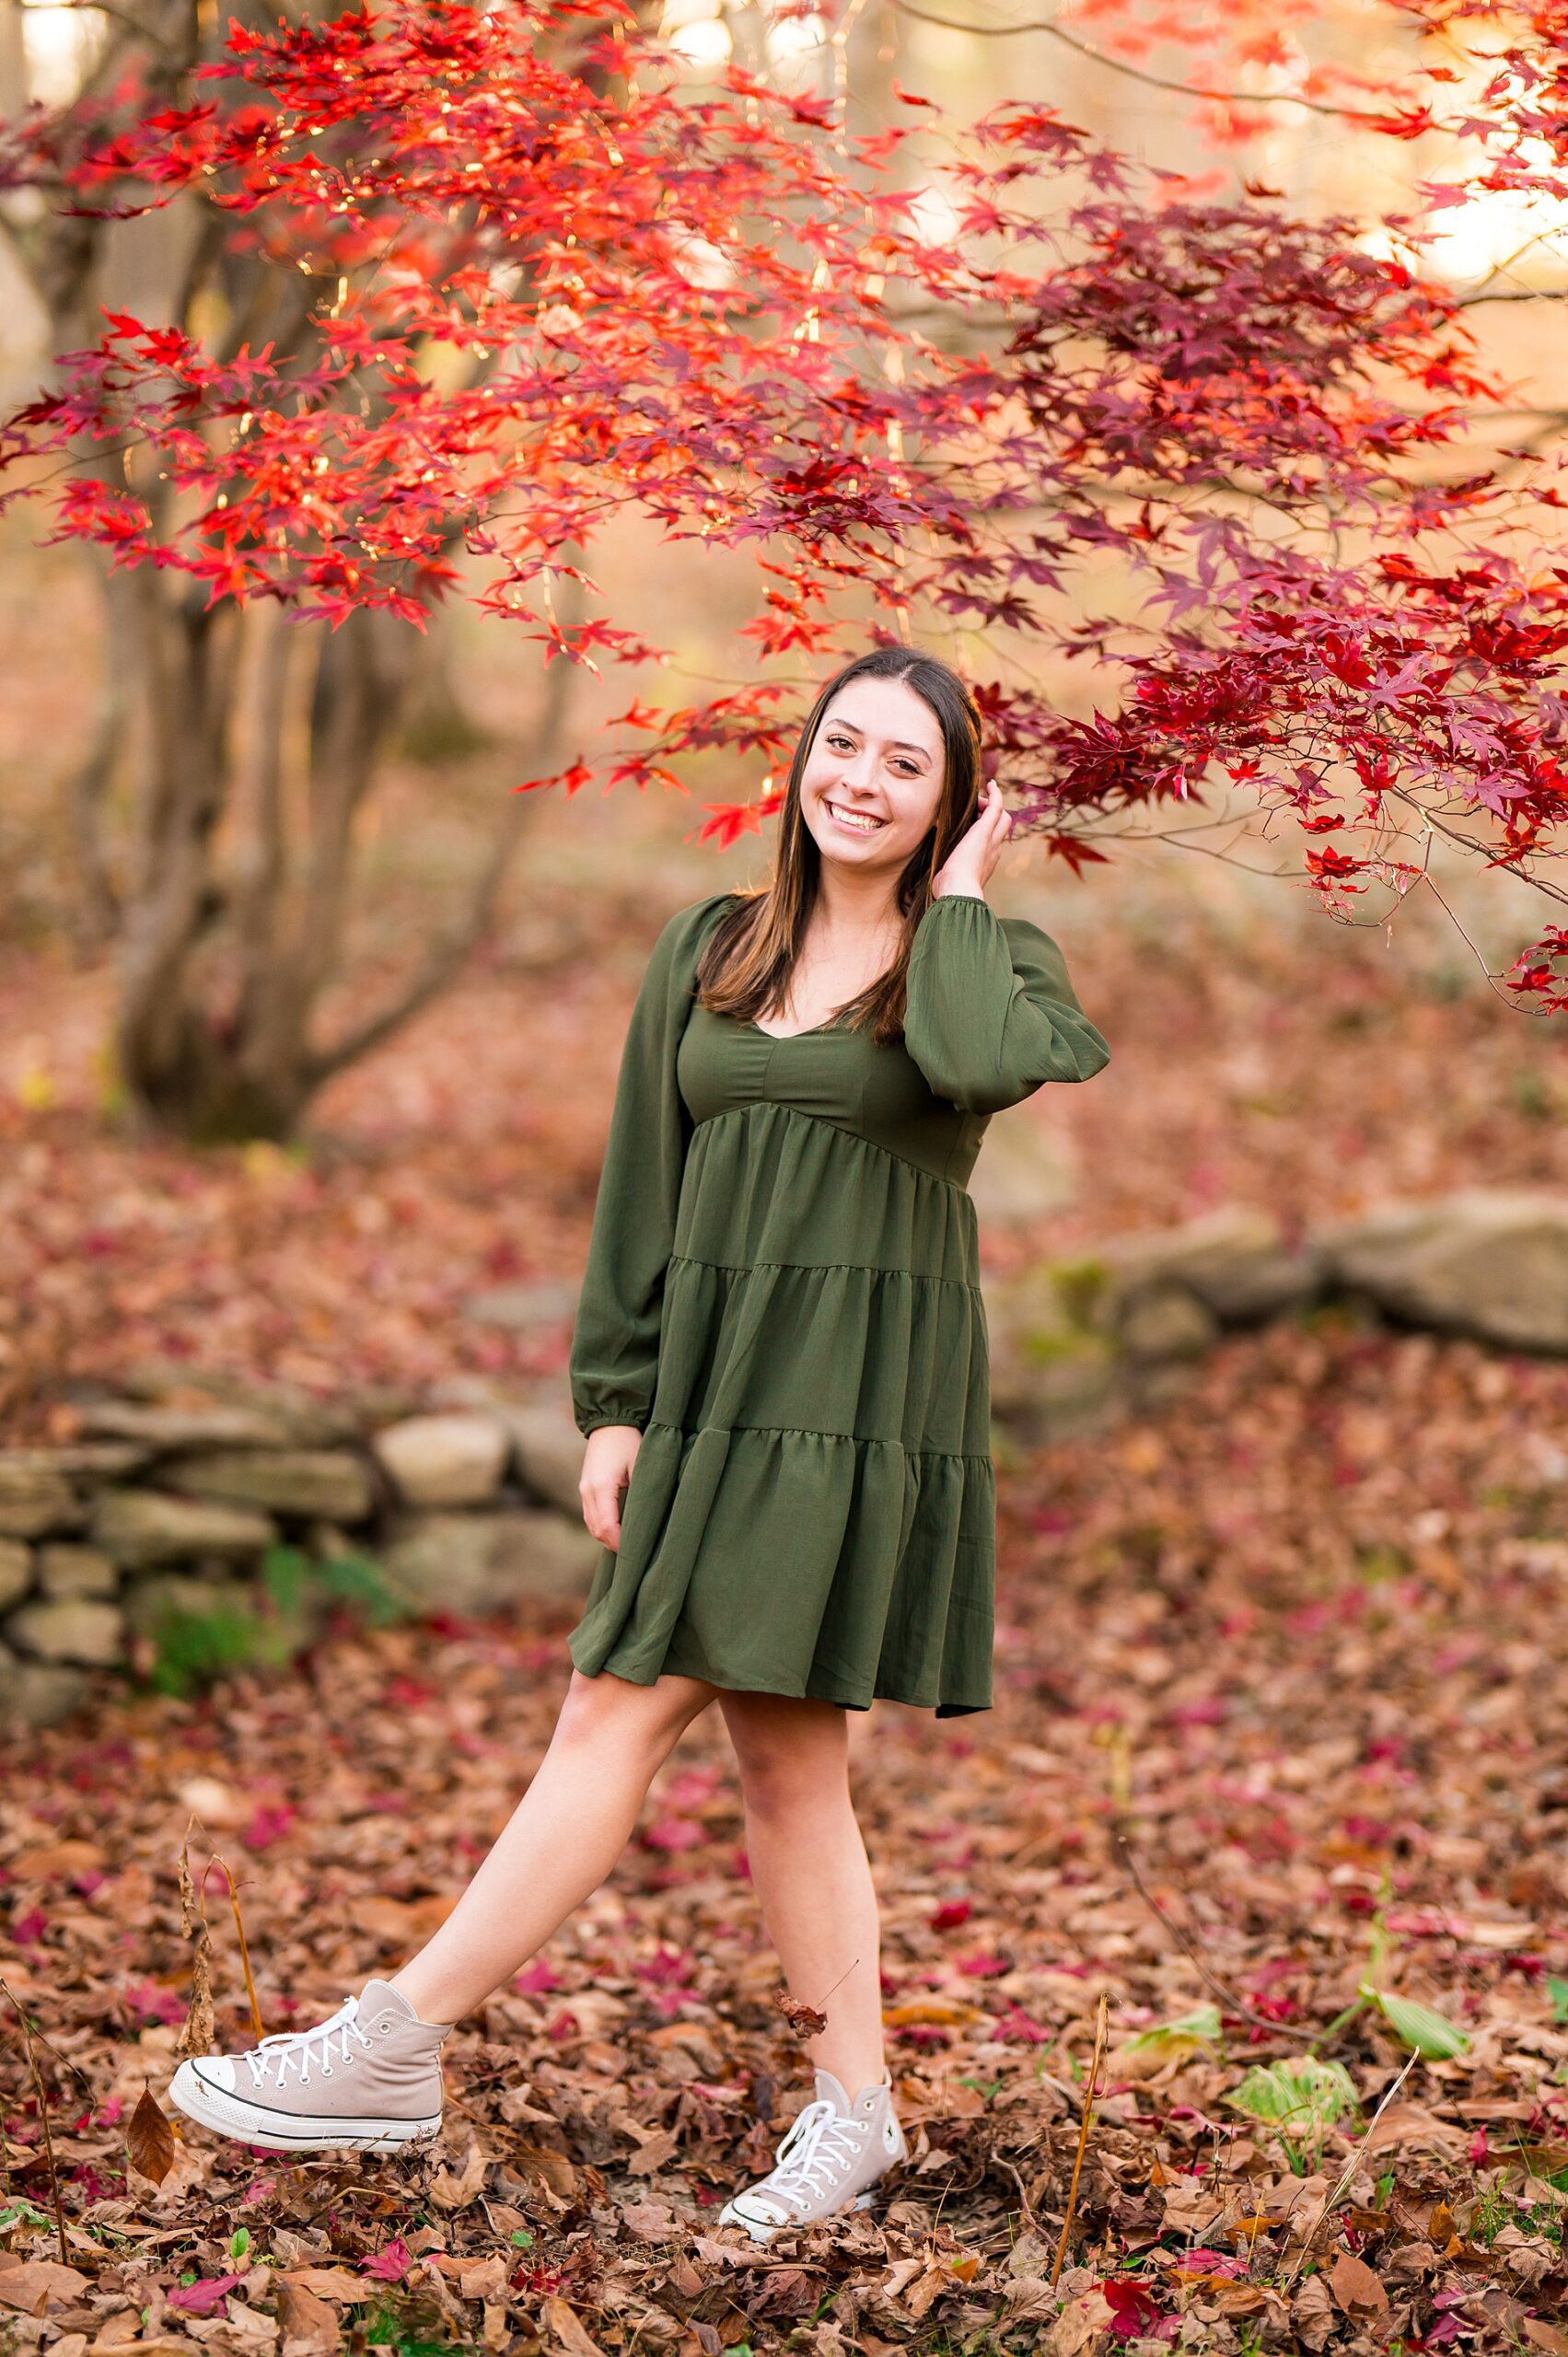 senior in olive green dress surrounded by maroon fall leaves